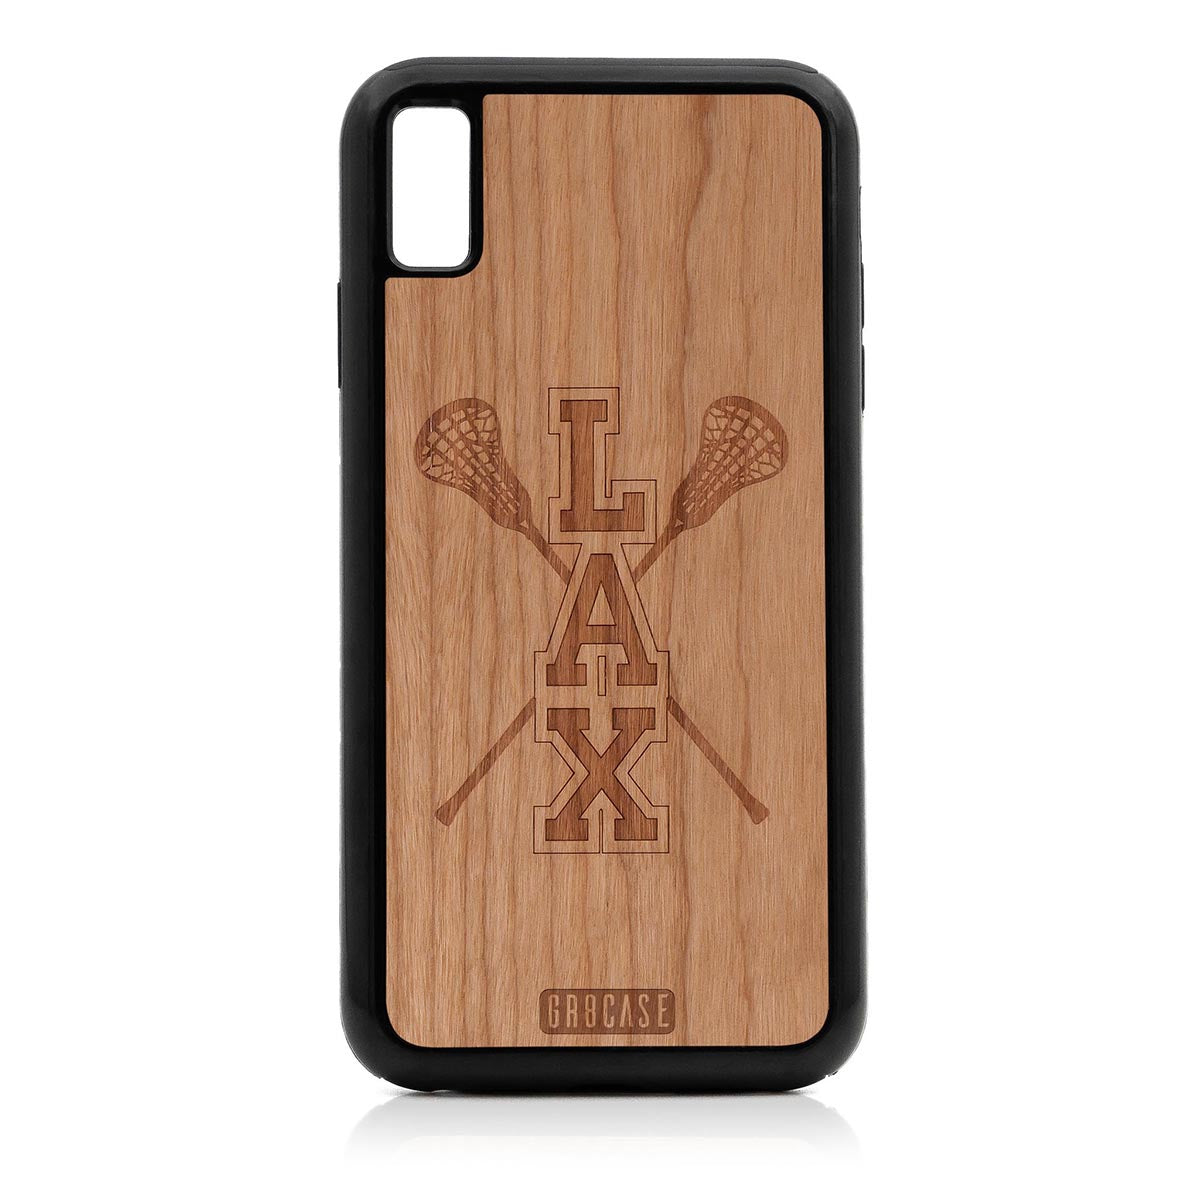 Lacrosse (LAX) Sticks Design Wood Case For iPhone XS Max by GR8CASE